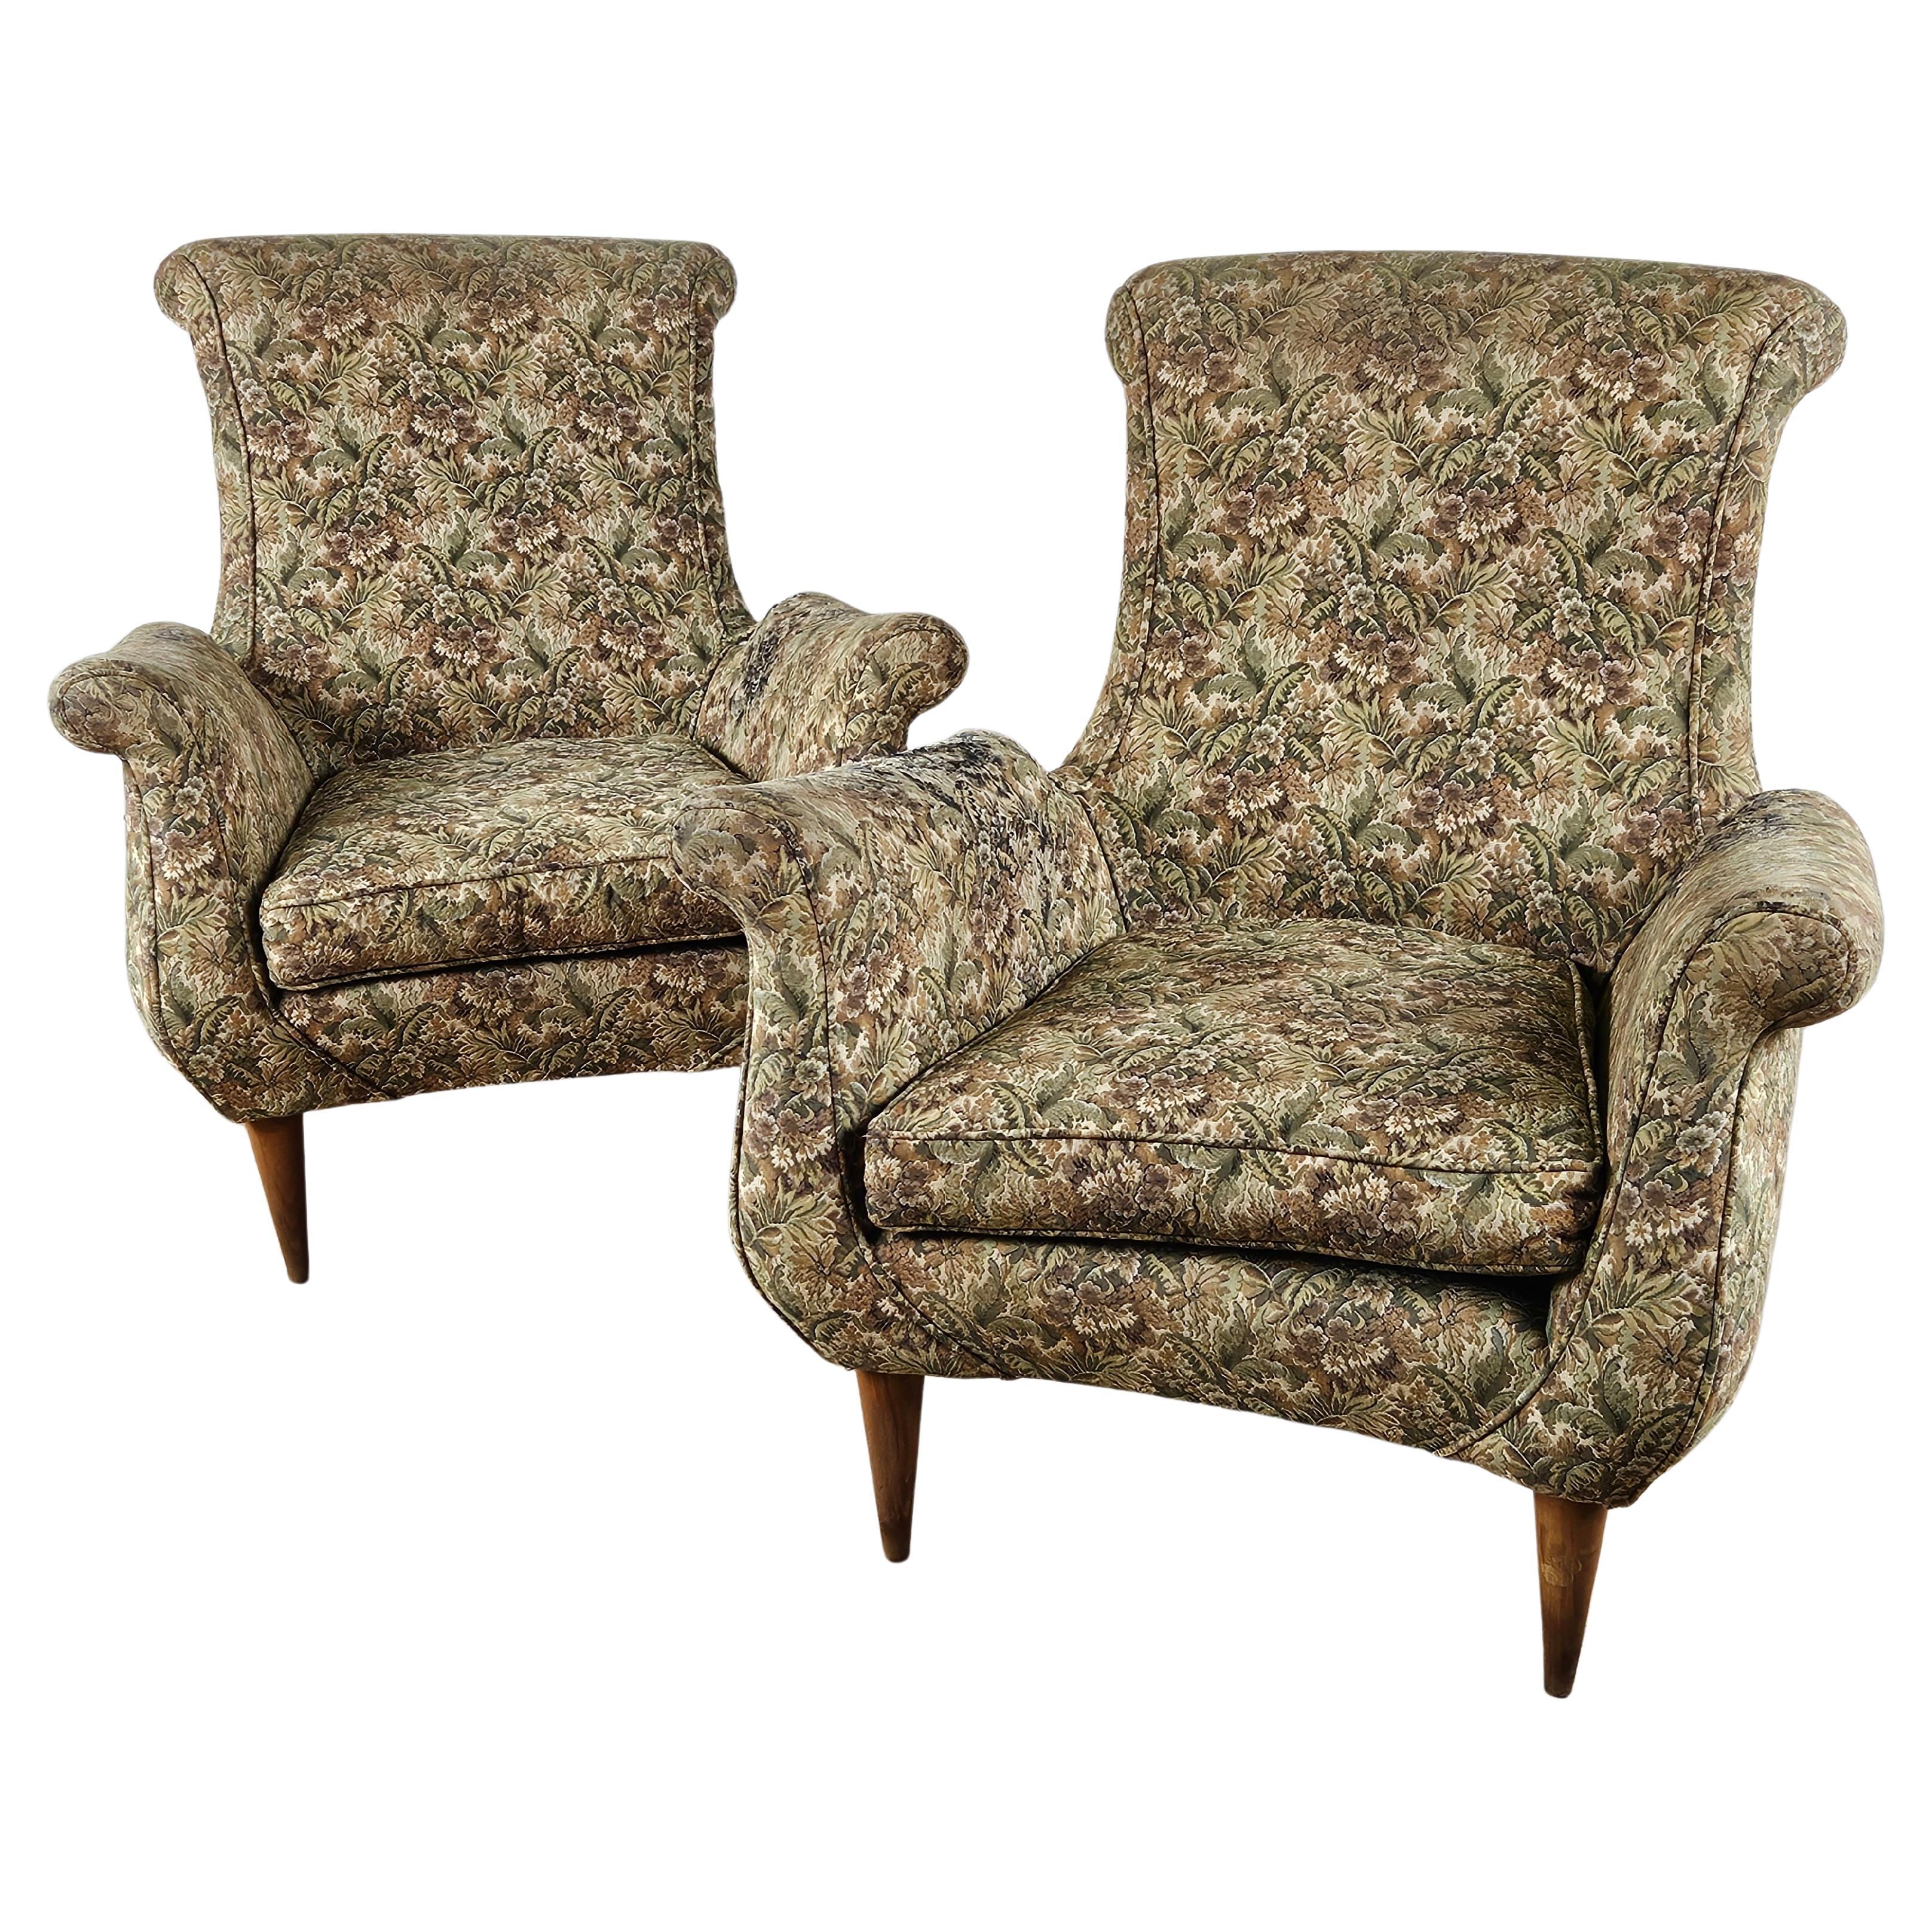 1970s floral fabric armchairs with wooden feet For Sale